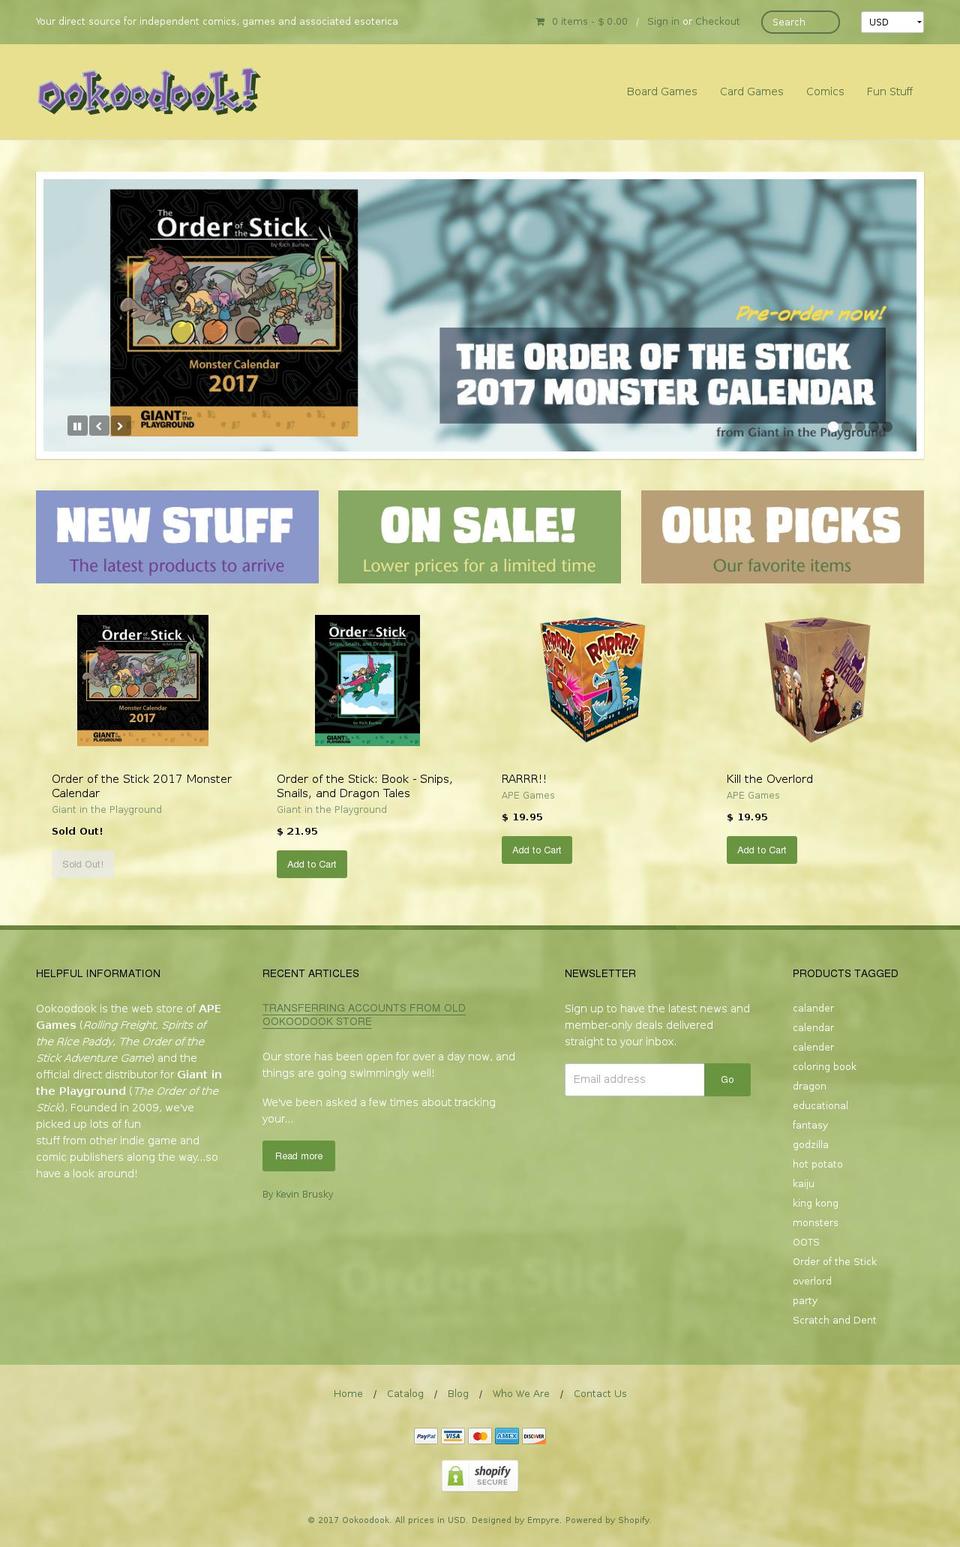 Providence Shopify theme site example ookoodook.com